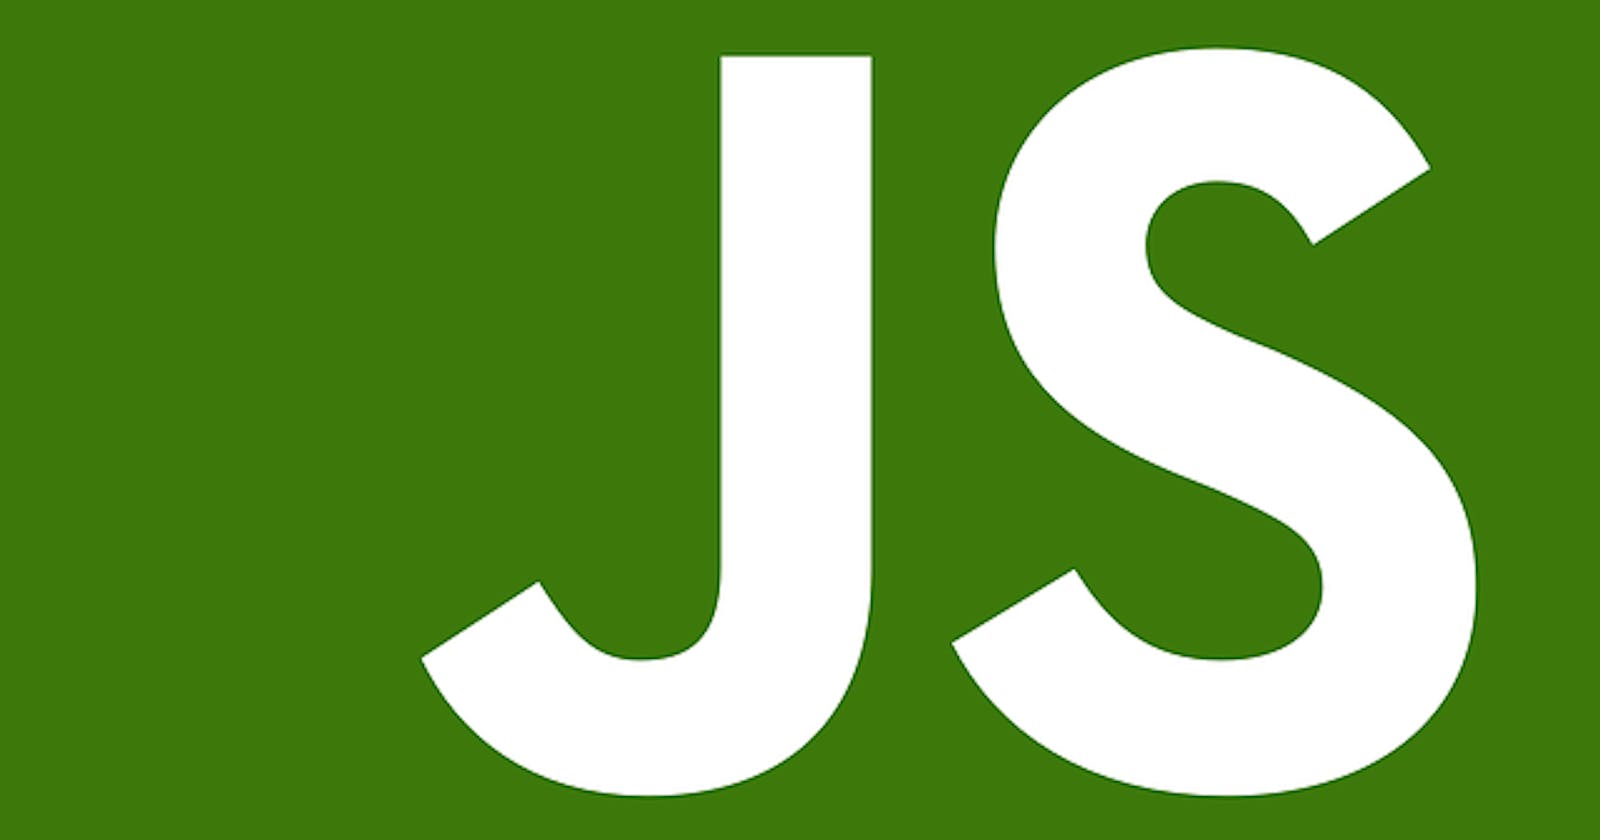 What You Should Know About JavaScript